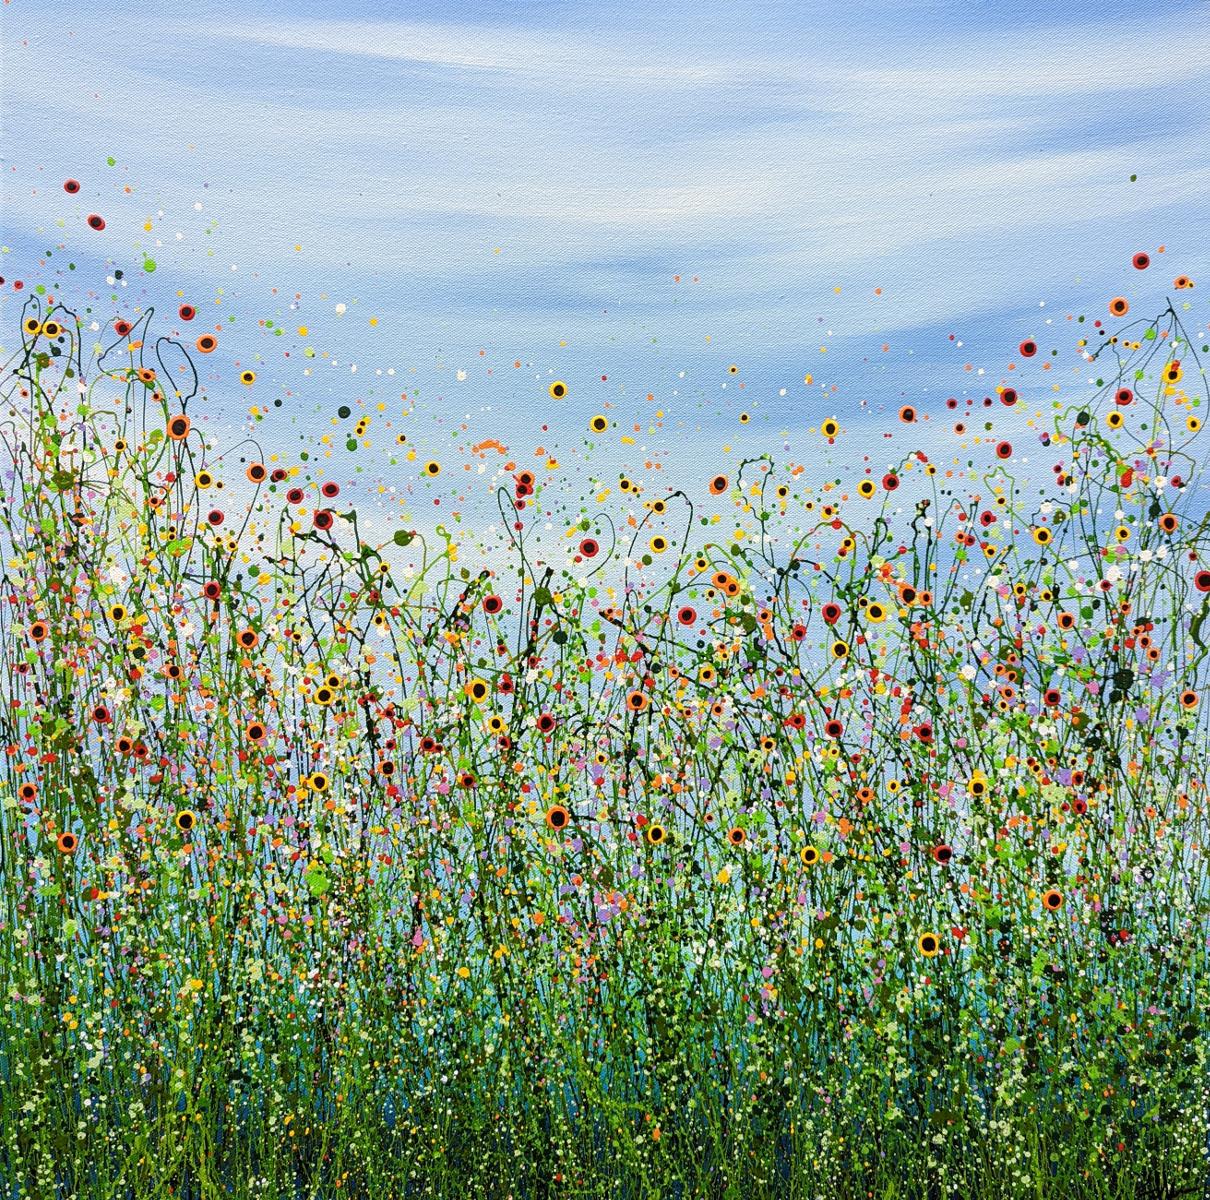 Lucy Moore  Figurative Painting - Morning Poppy Meadows #18 by Lucy Moore, Original art, Abstract, floral 